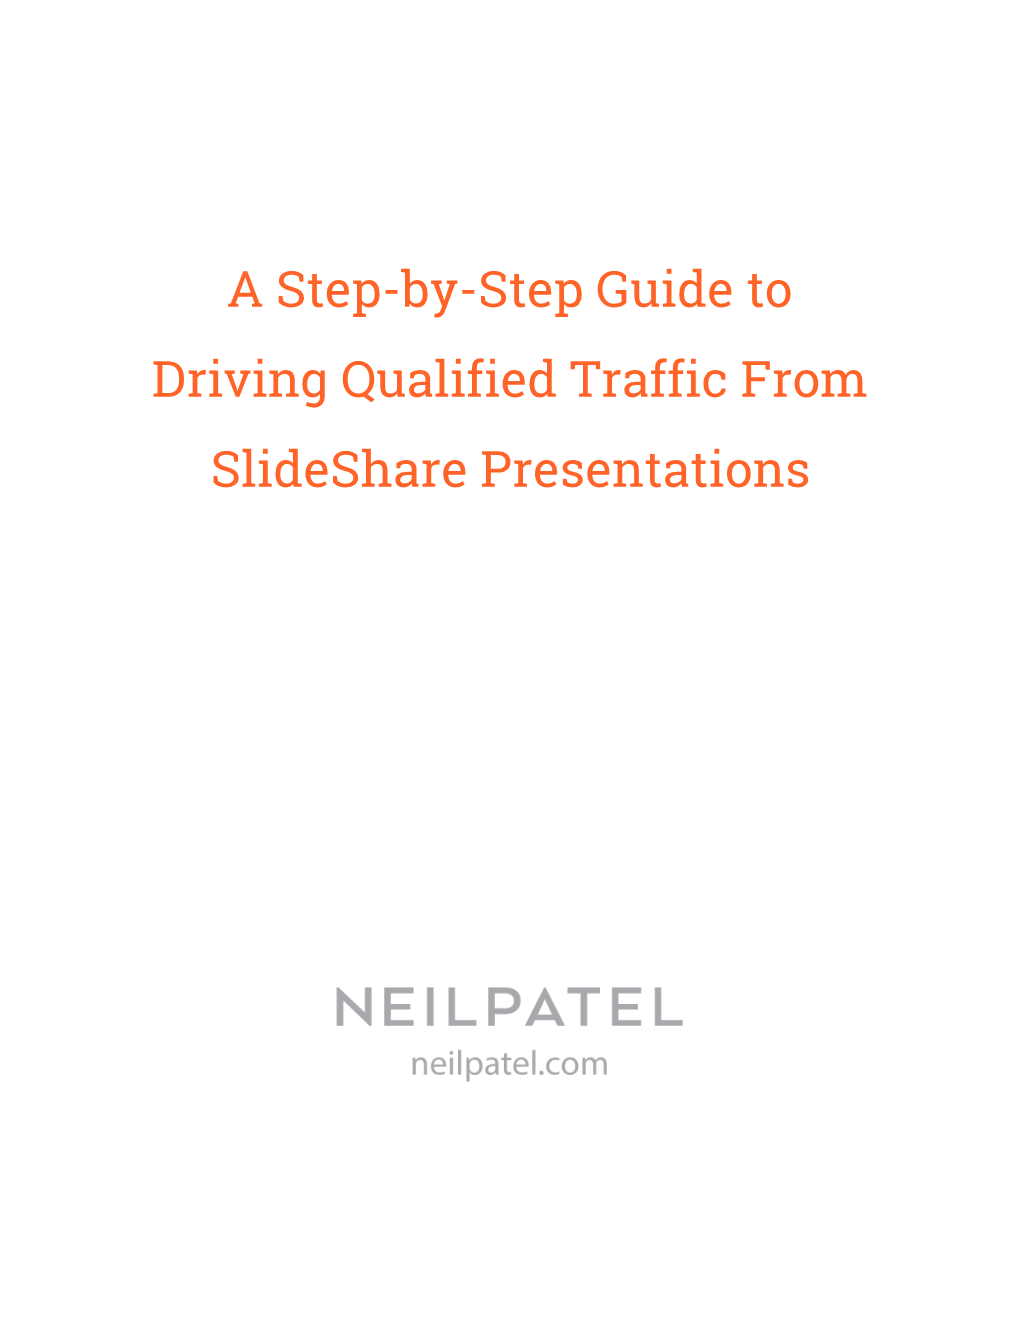 A Step-By-Step Guide to Driving Qualified Traffic from Slideshare Presentations